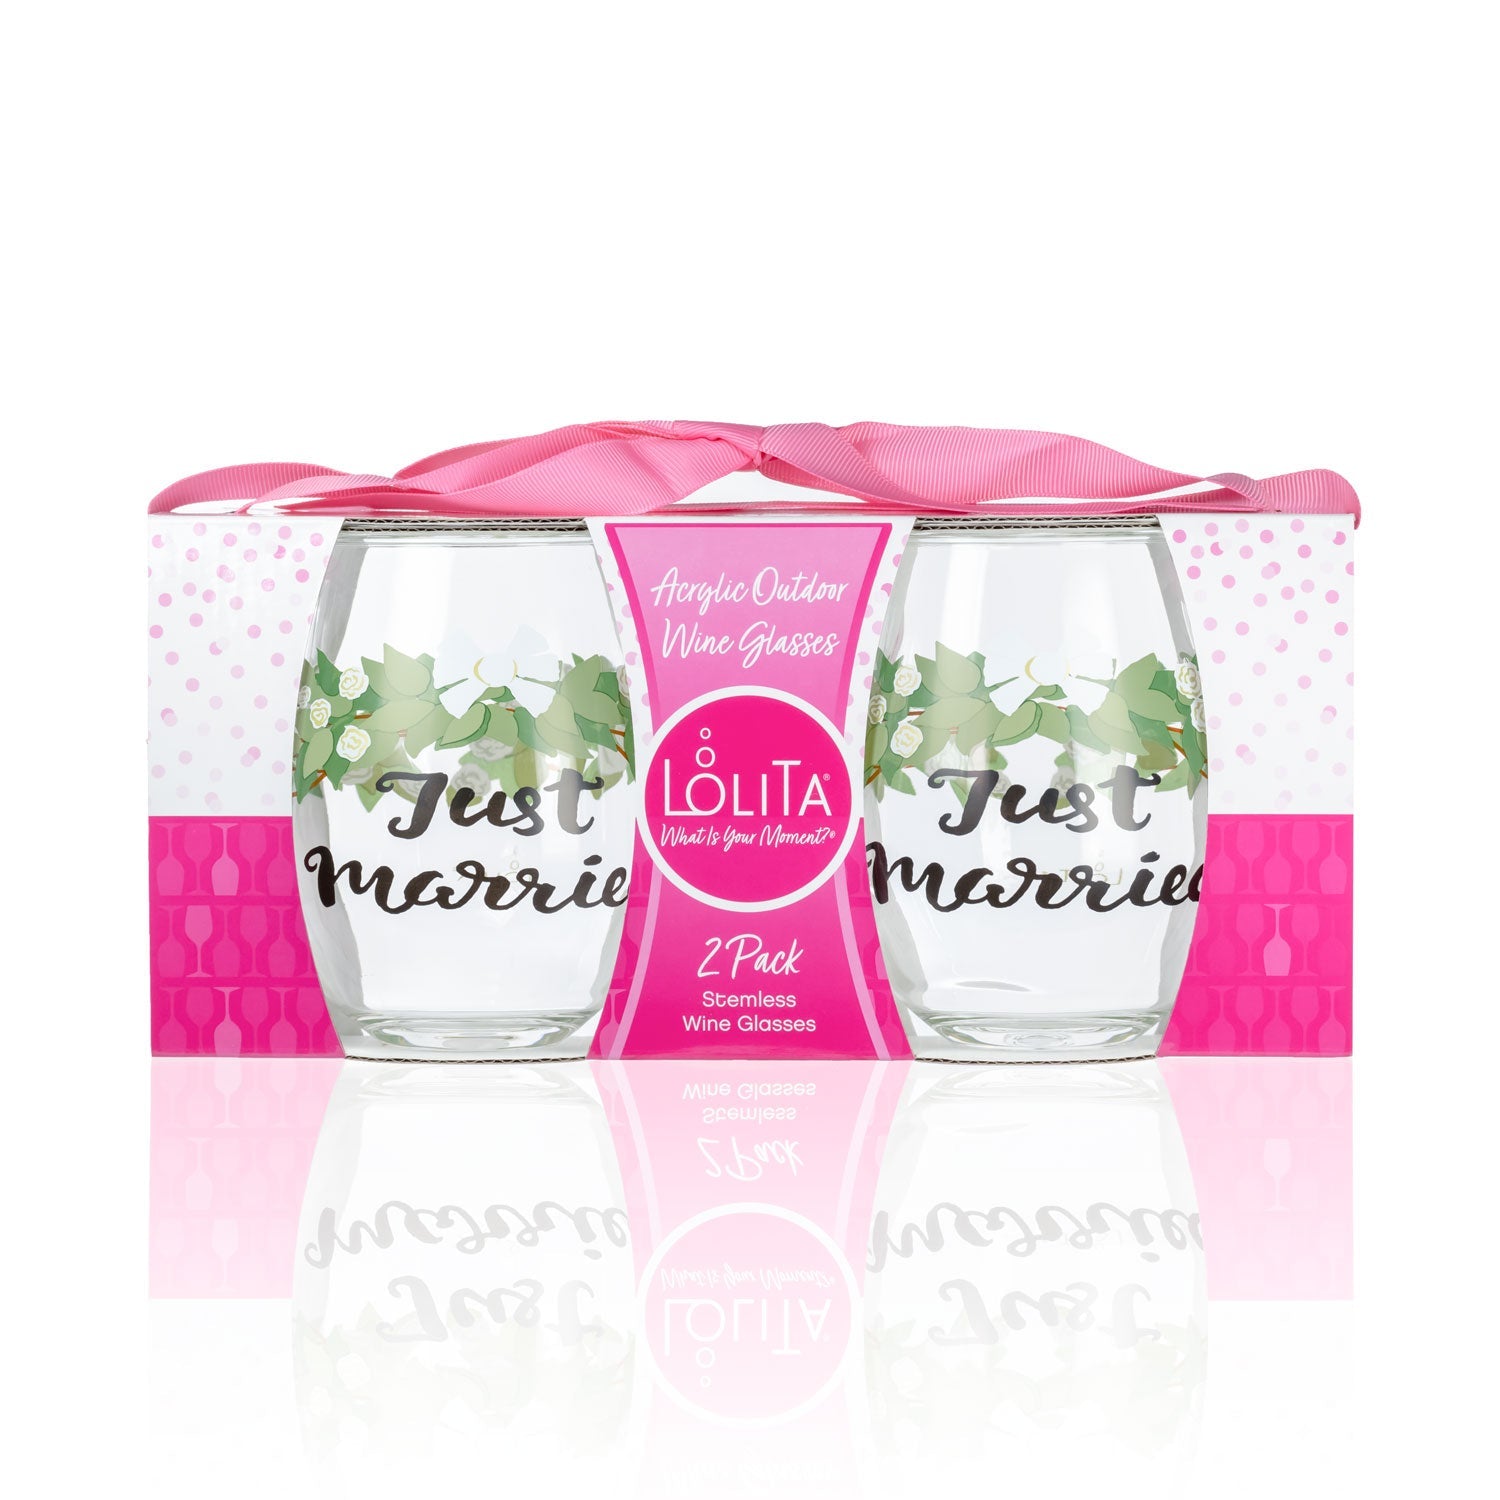 Lolita Just Married Party to go 15oz Acrylic Stemless Wine Glasses set of 2 giftbox